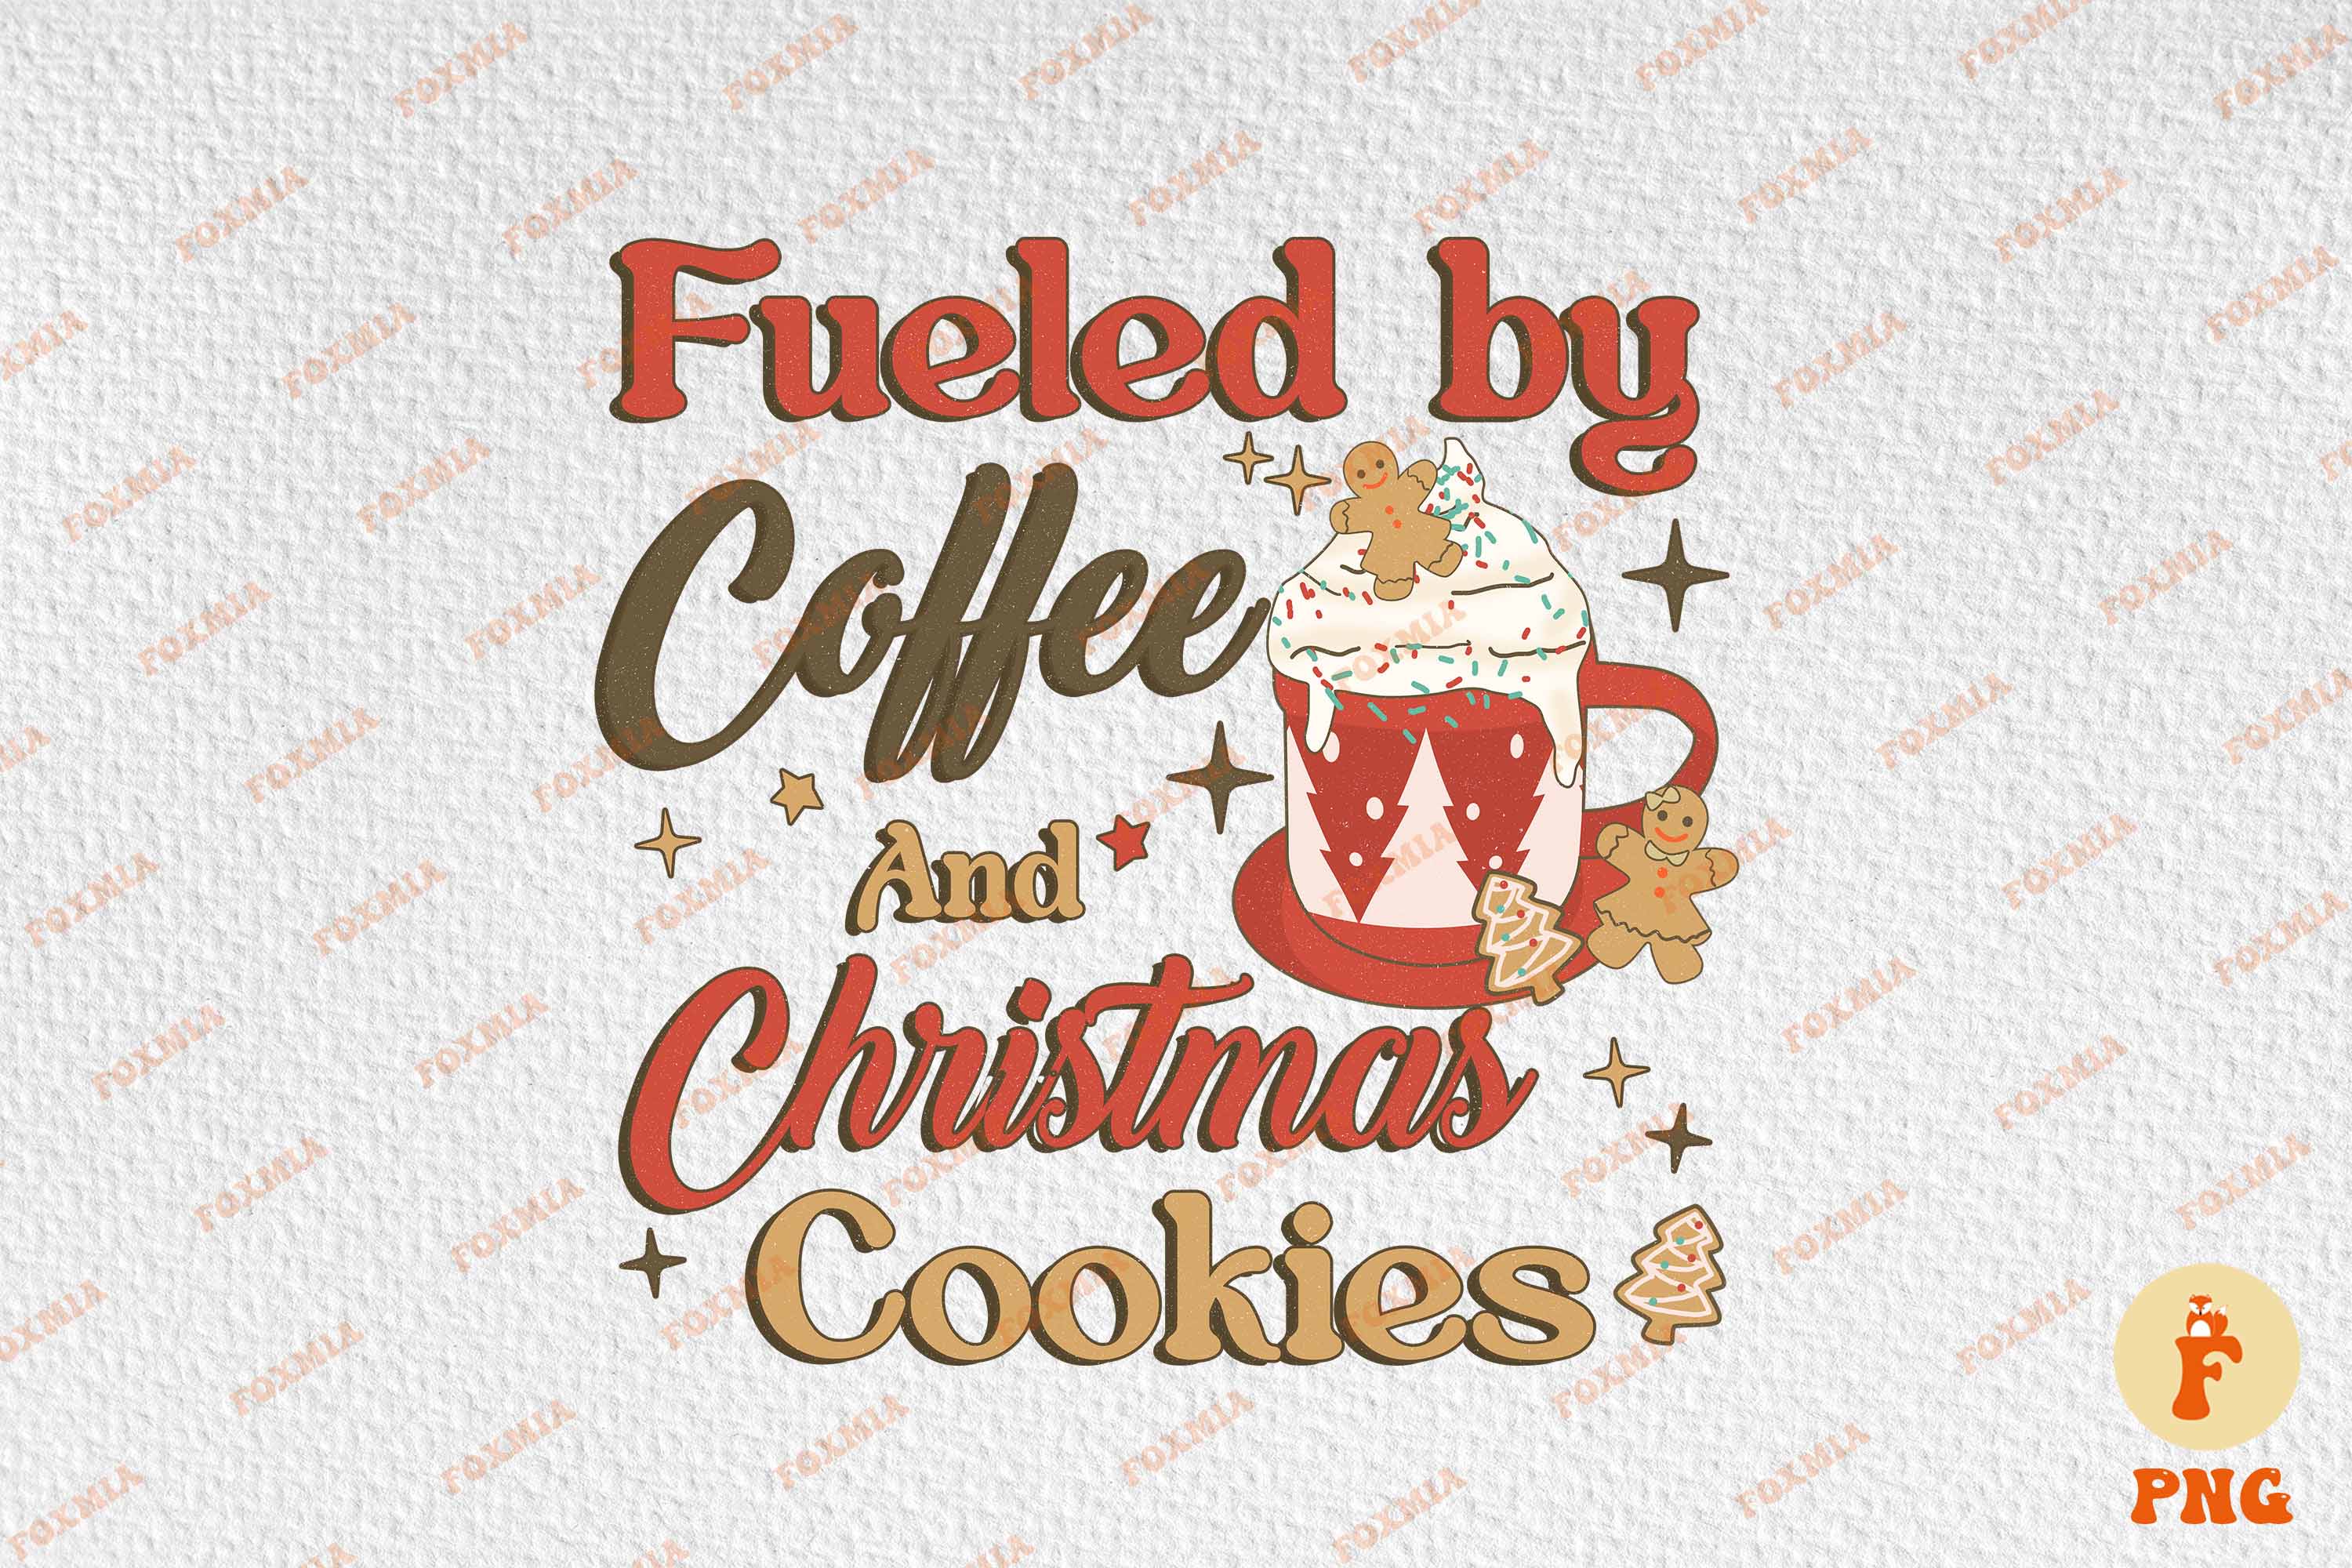 This image is fueled by coffee and Christmas cookies.